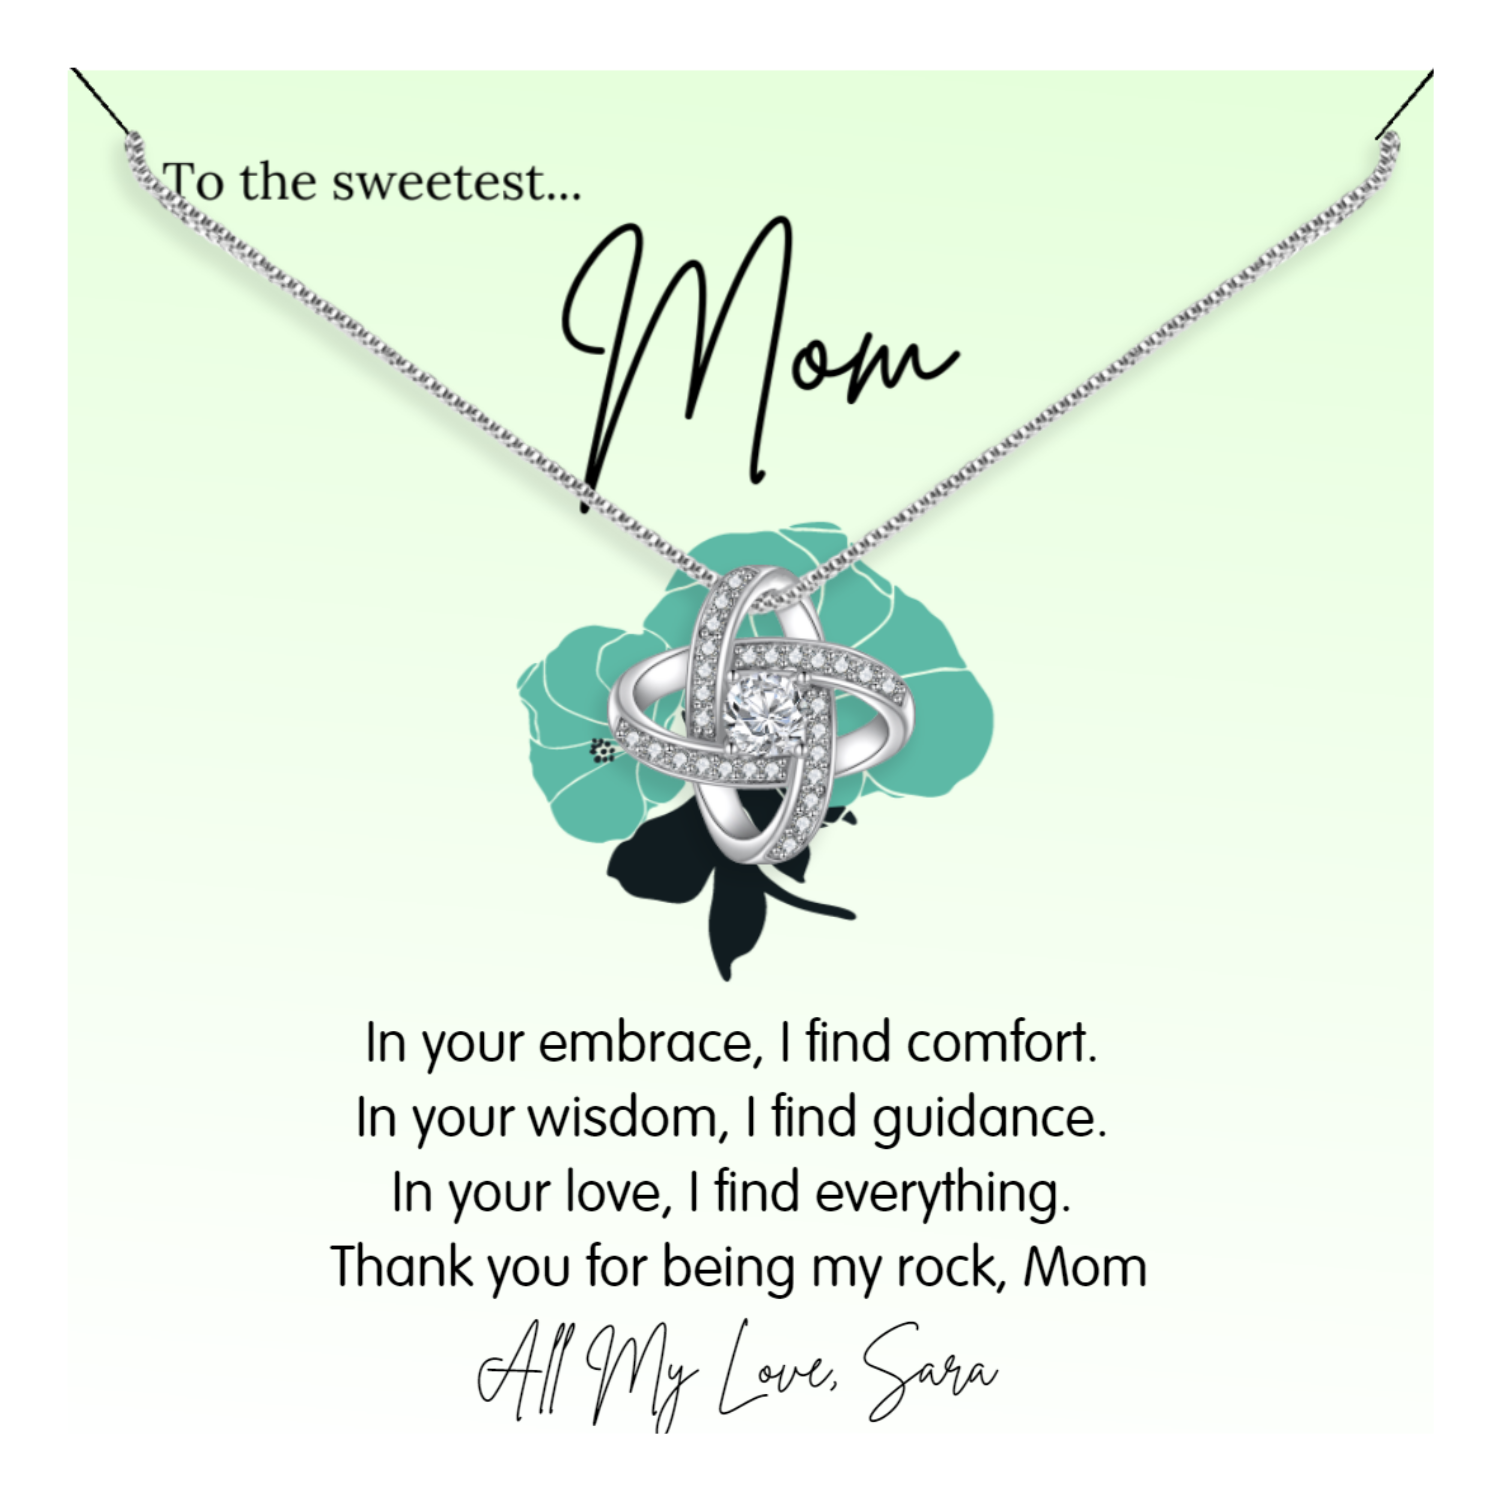 Personalized Necklaces + Message Cards - Love Knot Necklace + Custom Mom Card 